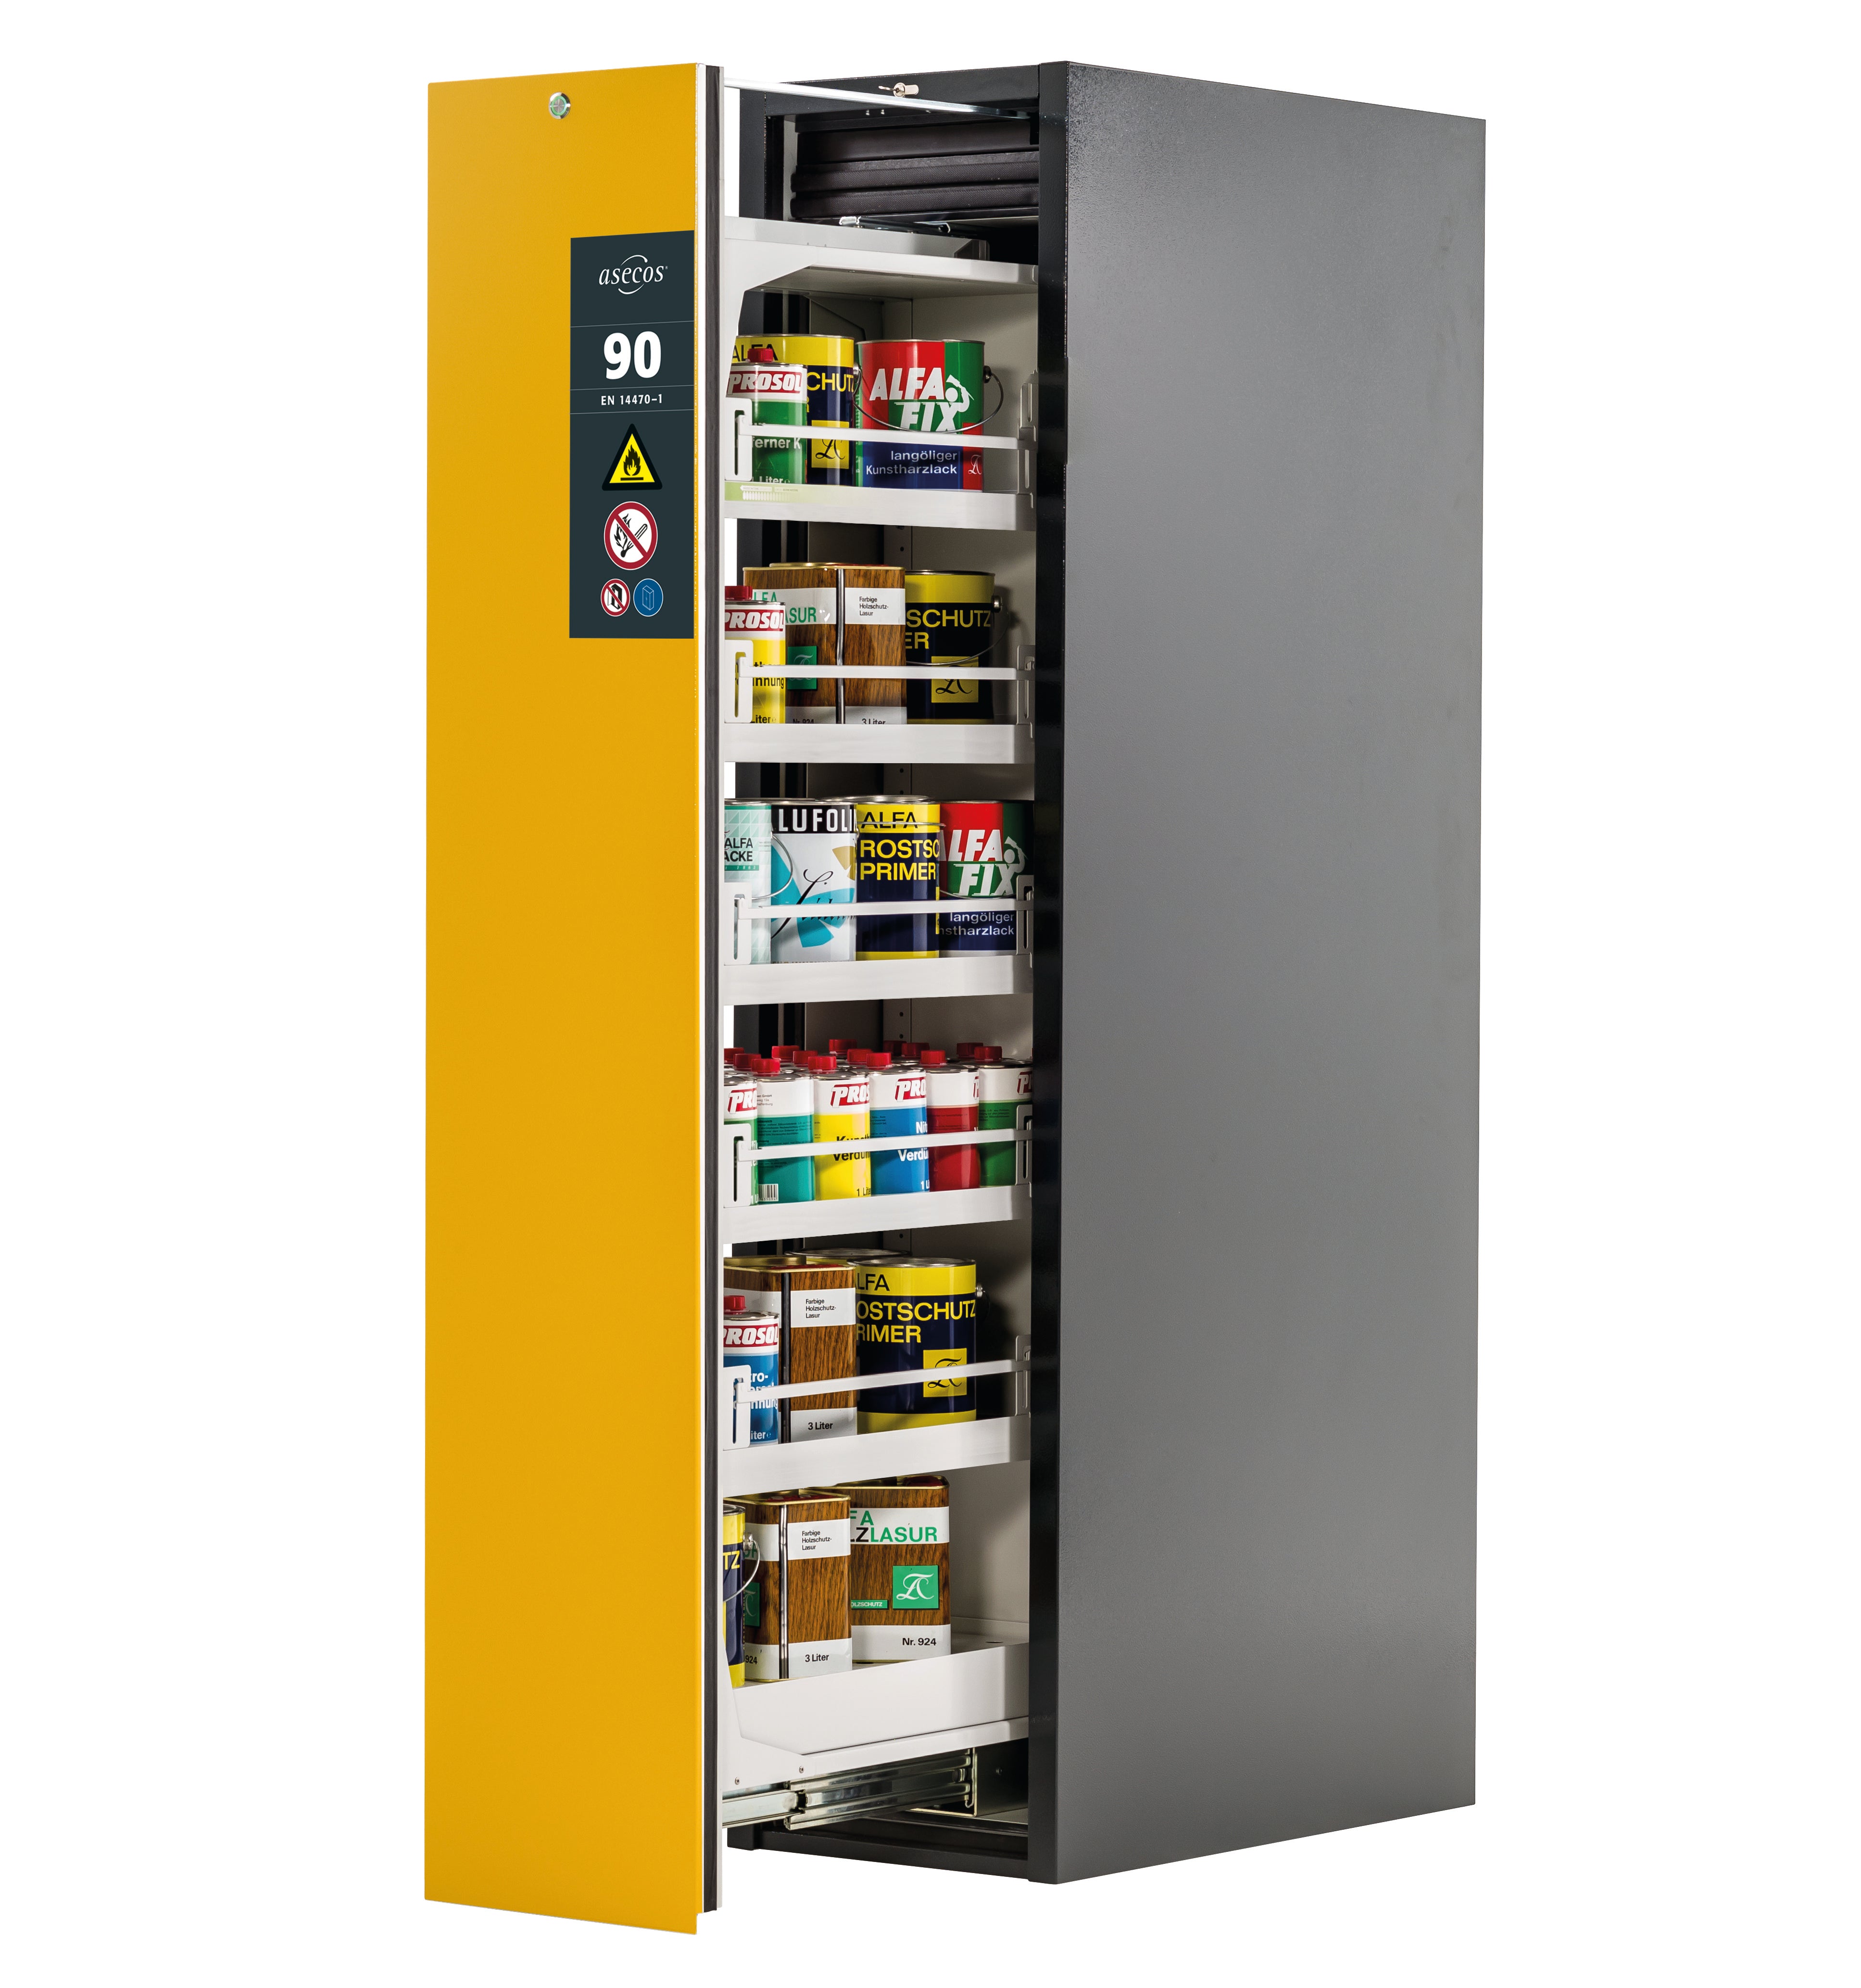 Type 90 safety cabinet V-MOVE-90 model V90.196.045.VDAC:0013 in safety yellow RAL 1004 with 5x standard tray base (sheet steel)